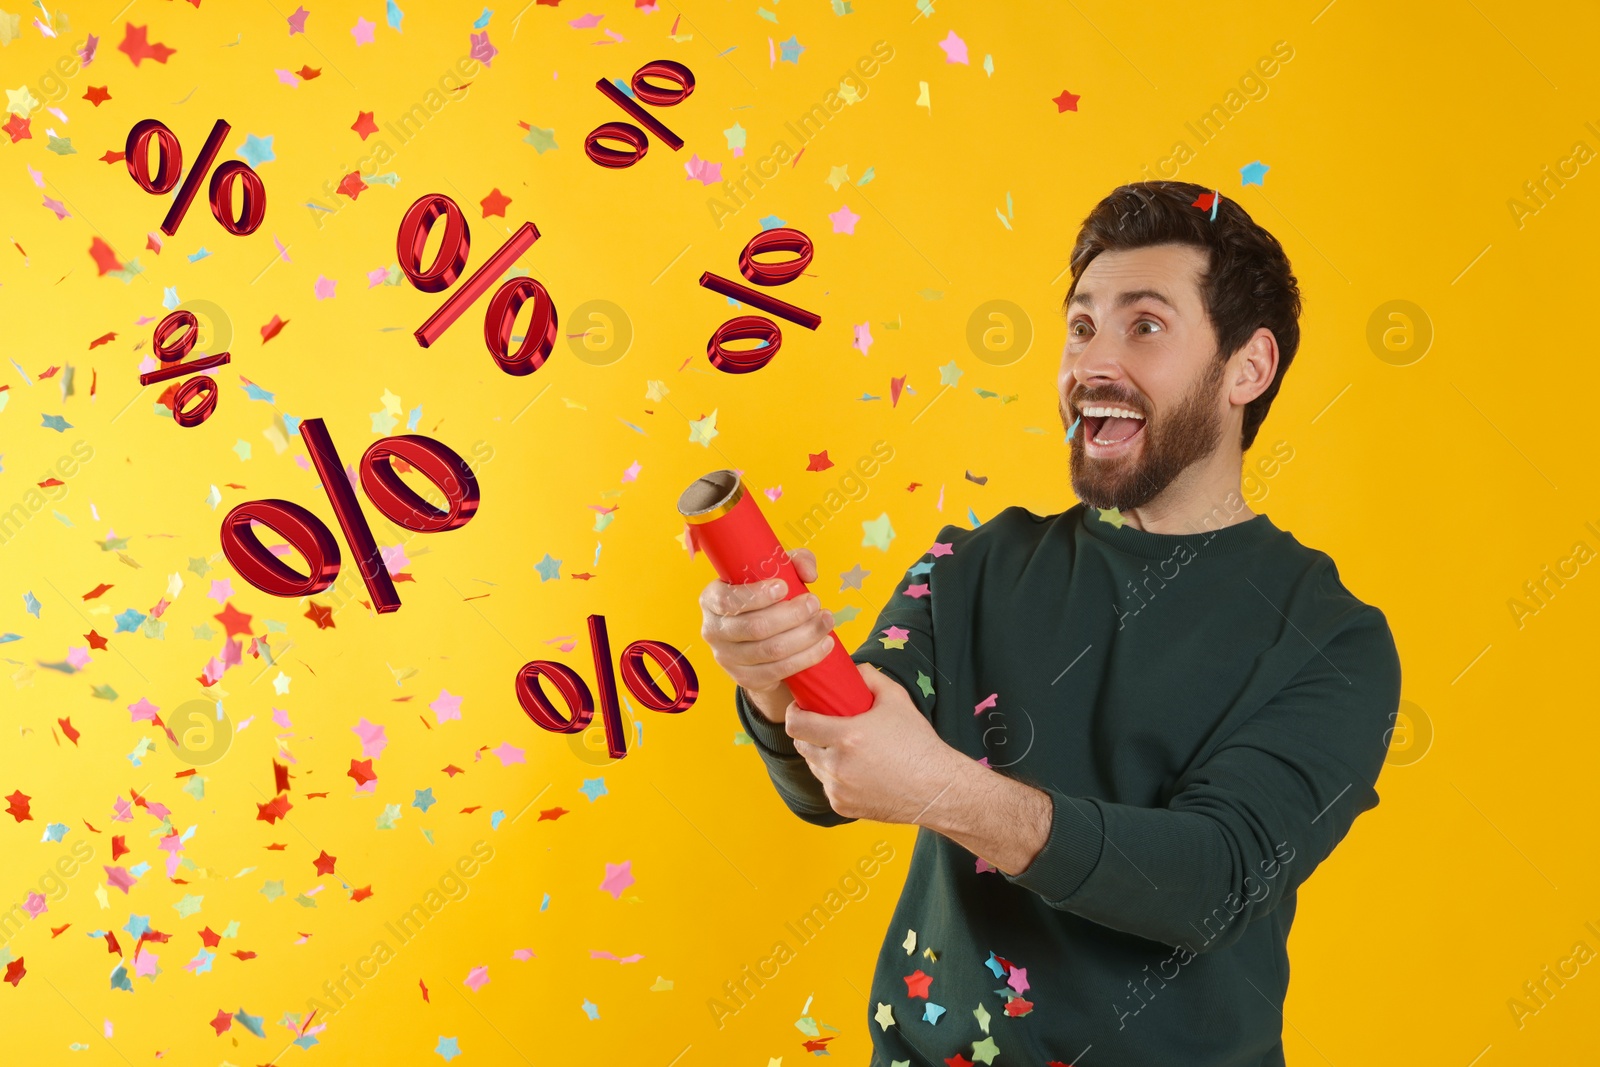 Image of Discount offer. Happy man blowing up party popper on golden background. Confetti and percent signs in air